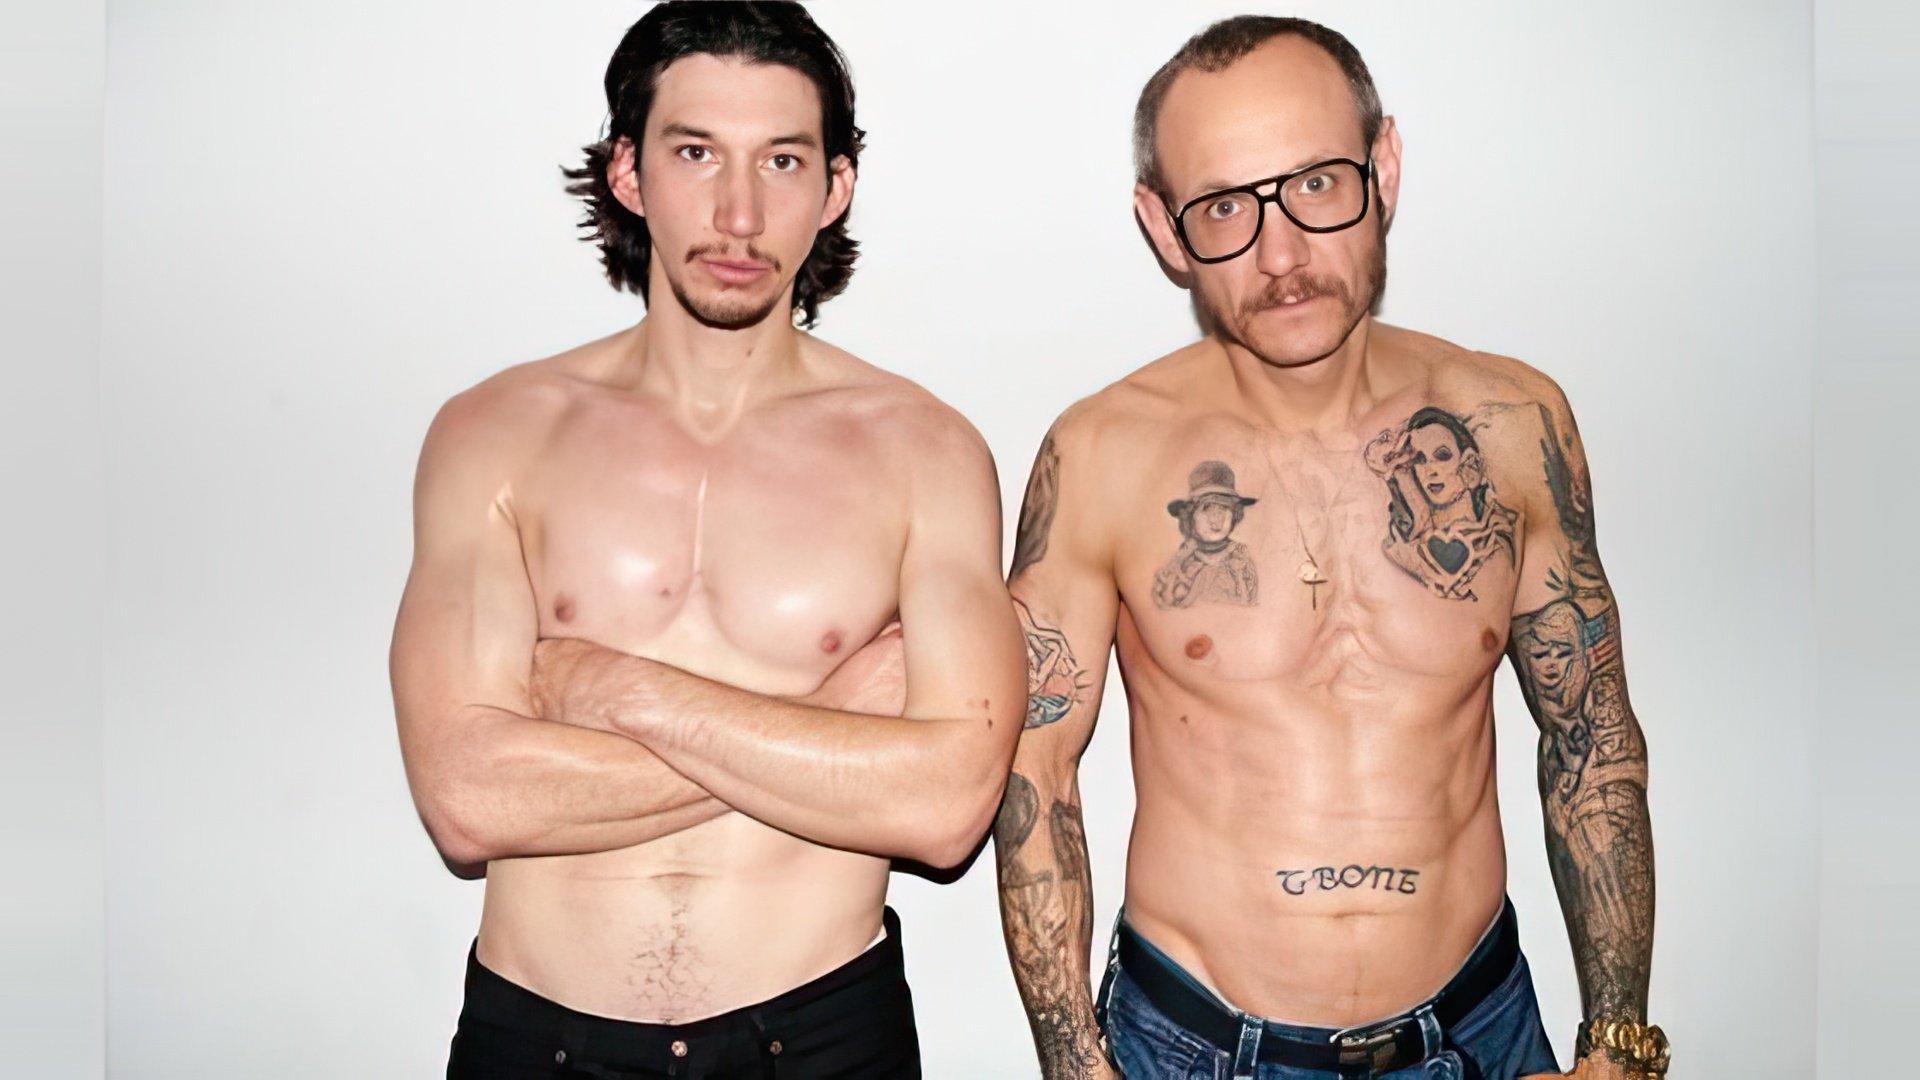 Co-starring with Terry Richardson in the TV series Girls